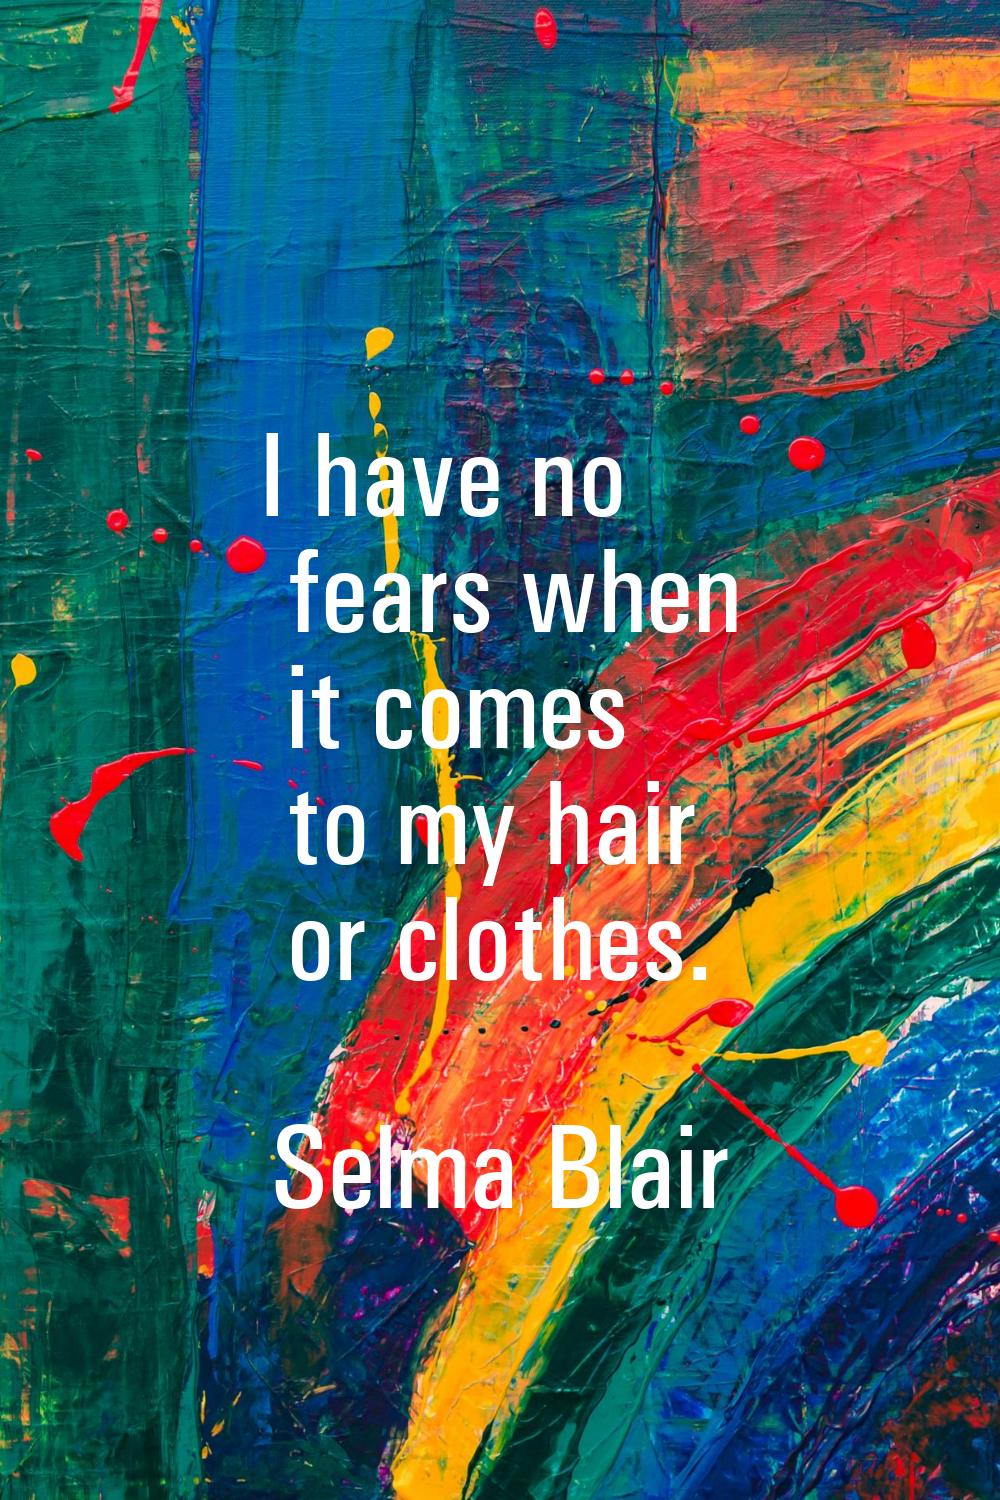 I have no fears when it comes to my hair or clothes.